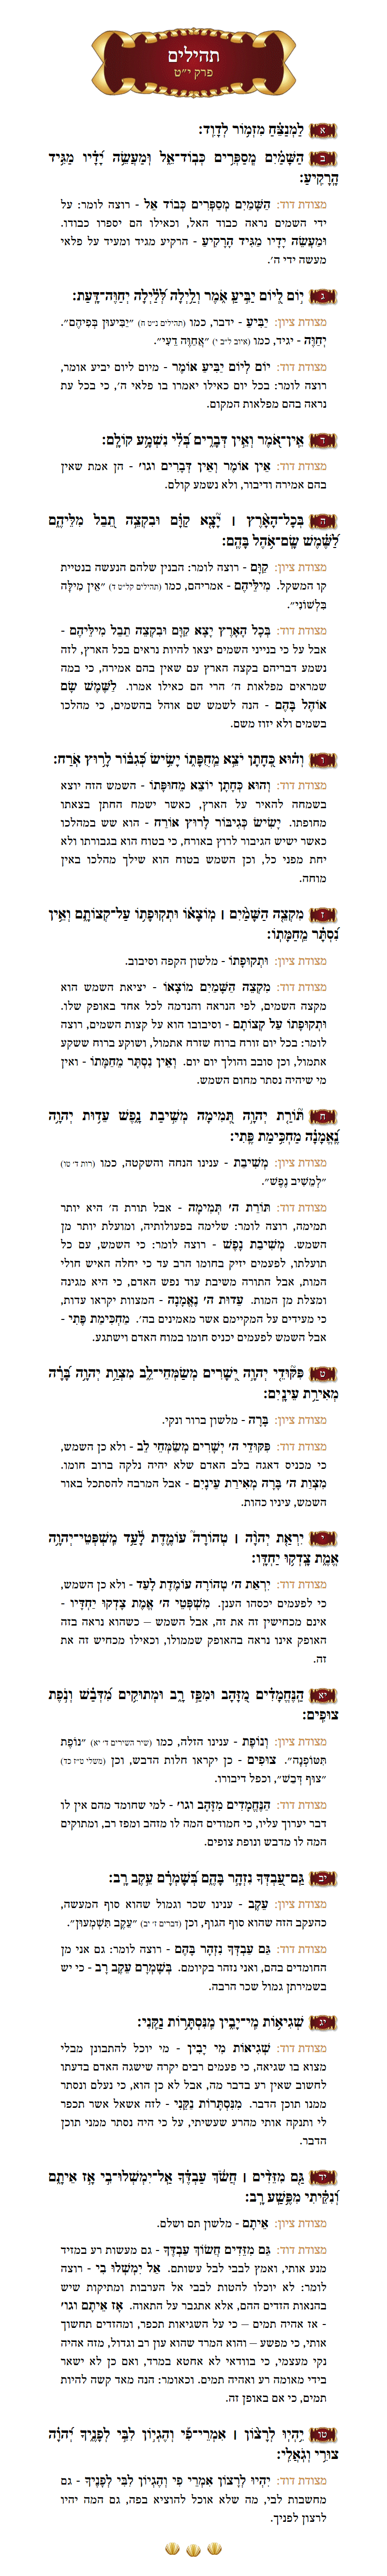 Sefer Tehillim Chapter 19 with commentary